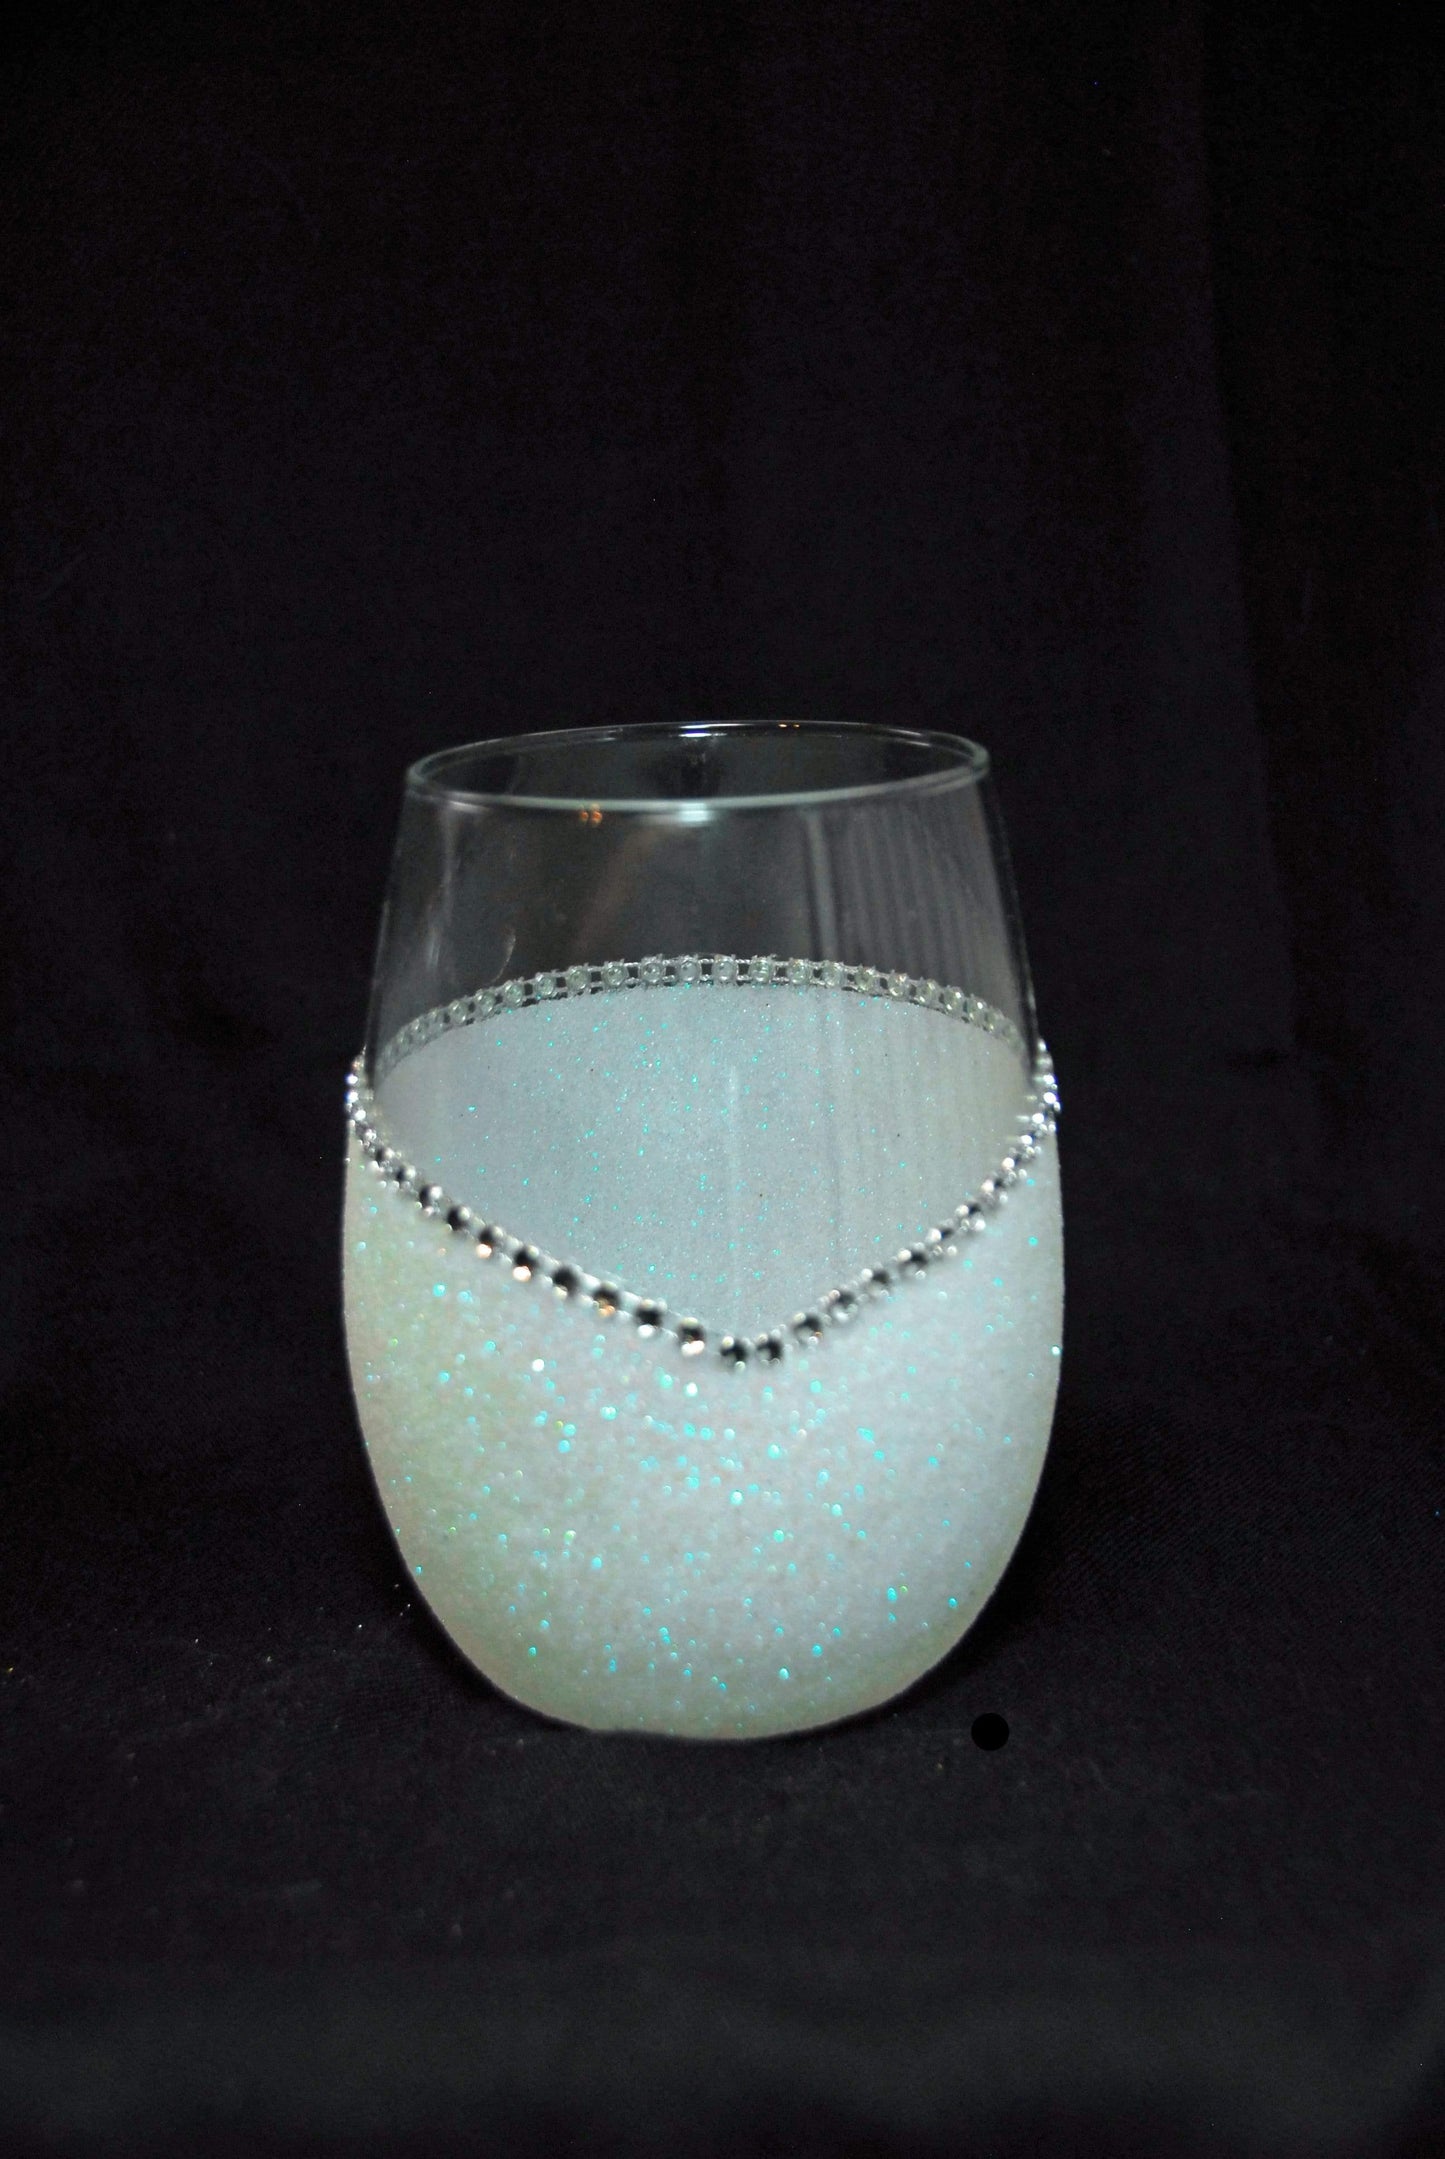 Floral Skull Design #1-Bling Stem or Stemless Wine Glasses-Choose your color-Pirate Theme - Winey Bitches - Wine- Women- K9's